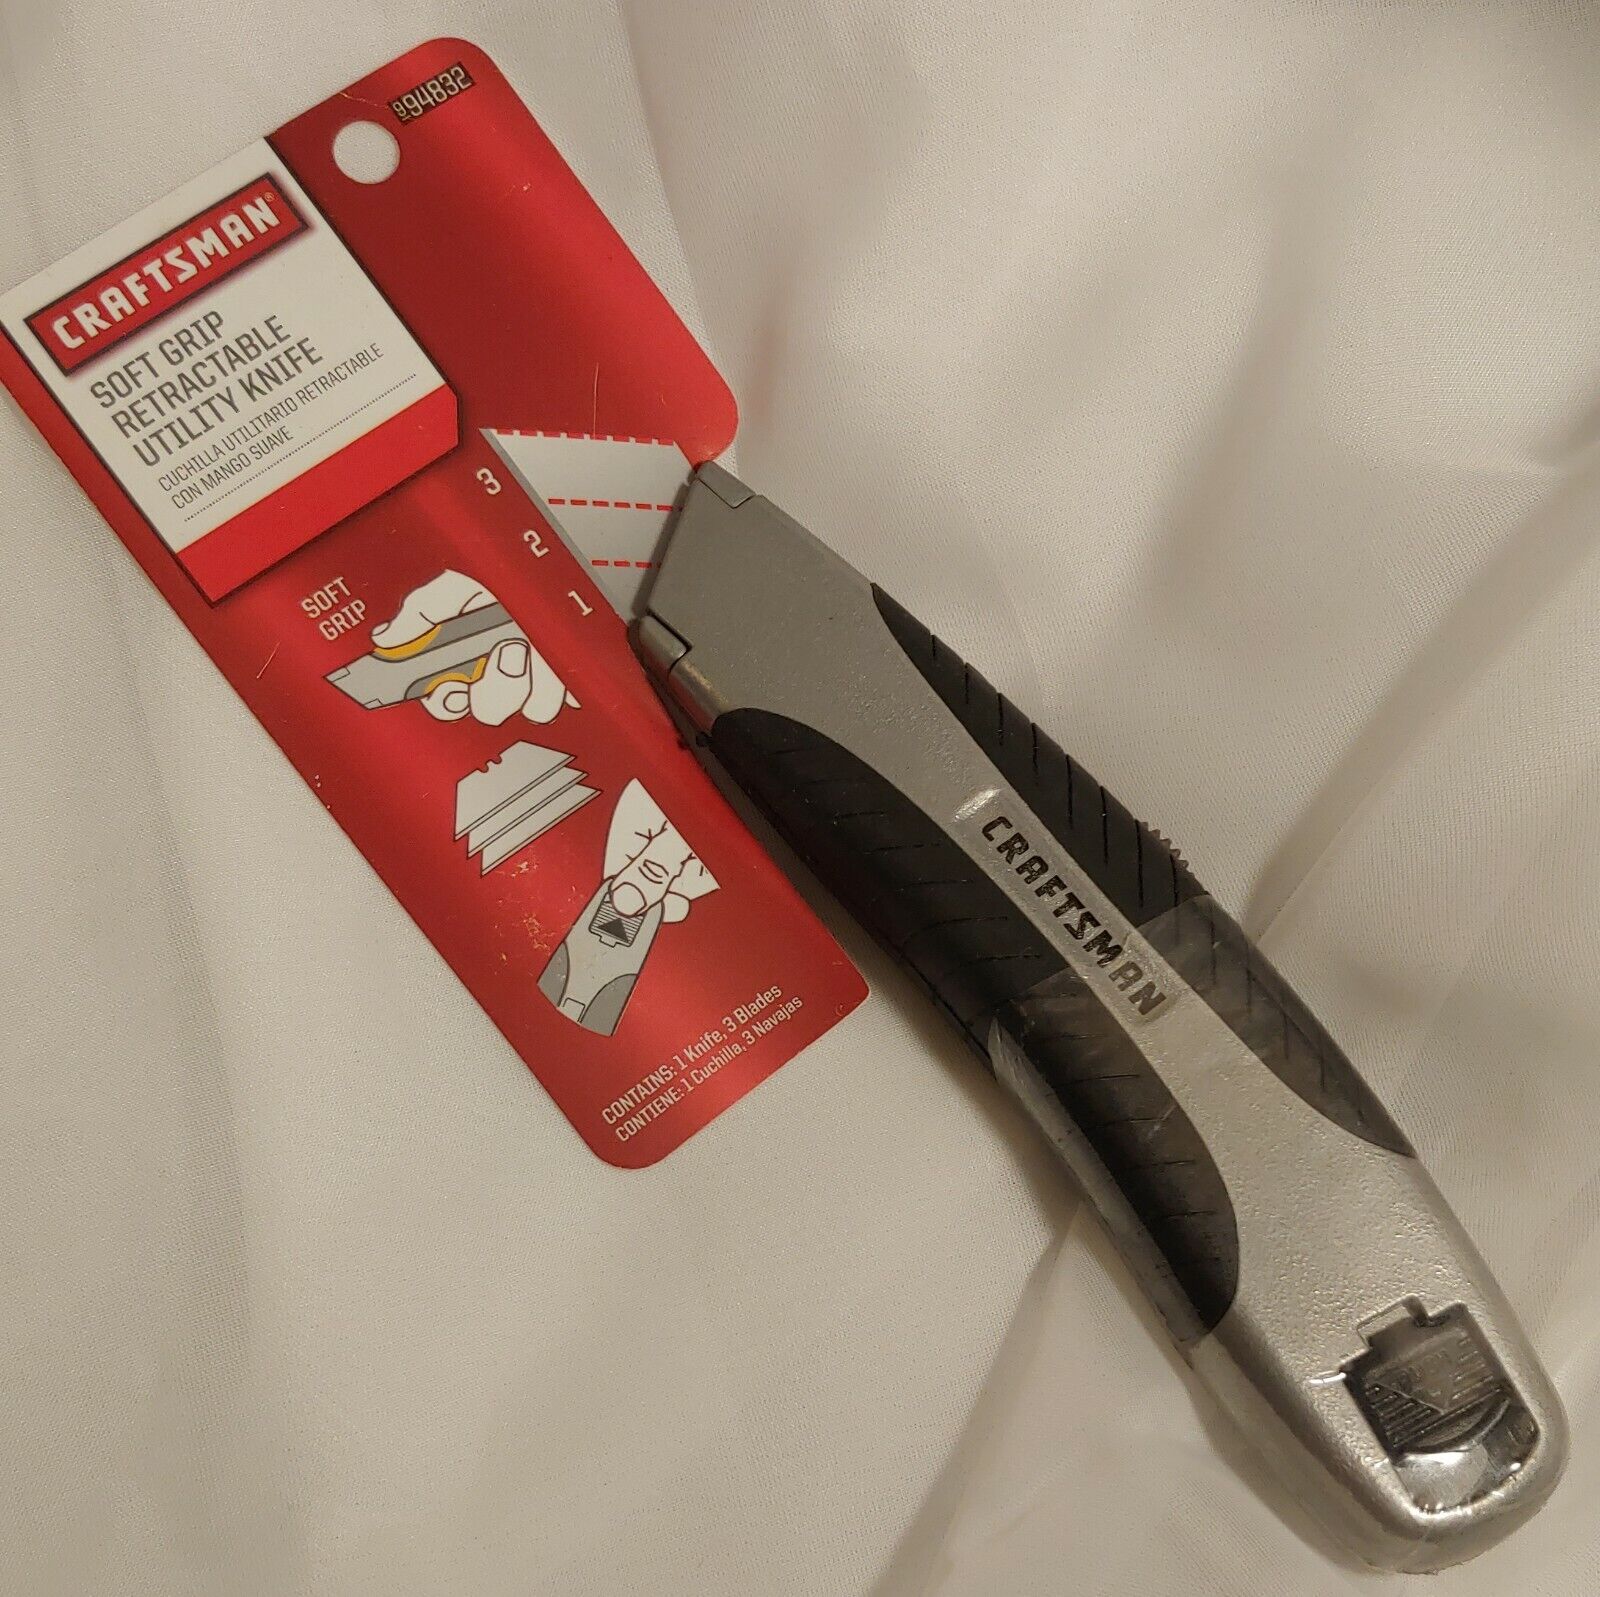 NEW Craftsman Soft Grip Retractable Utility USA P Outlet sale feature Knife 3 Blades Max 62% OFF